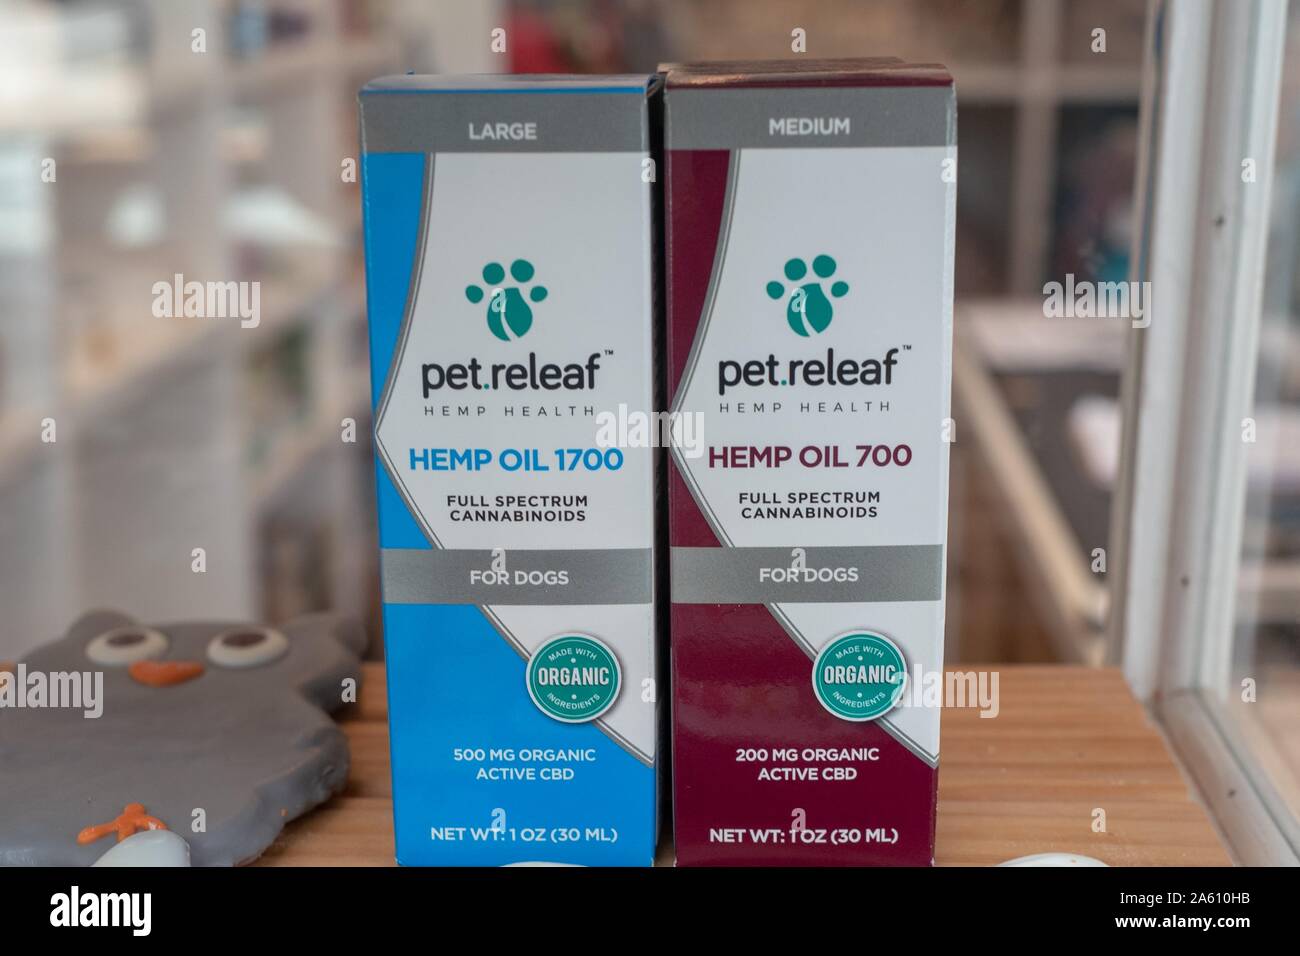 CBD oil formulated for pets is on sale at a boutique pet shop in San Ramon, California, following the legalization of hemp-derived cannabis products in 2018, September 24, 2019. () Stock Photo